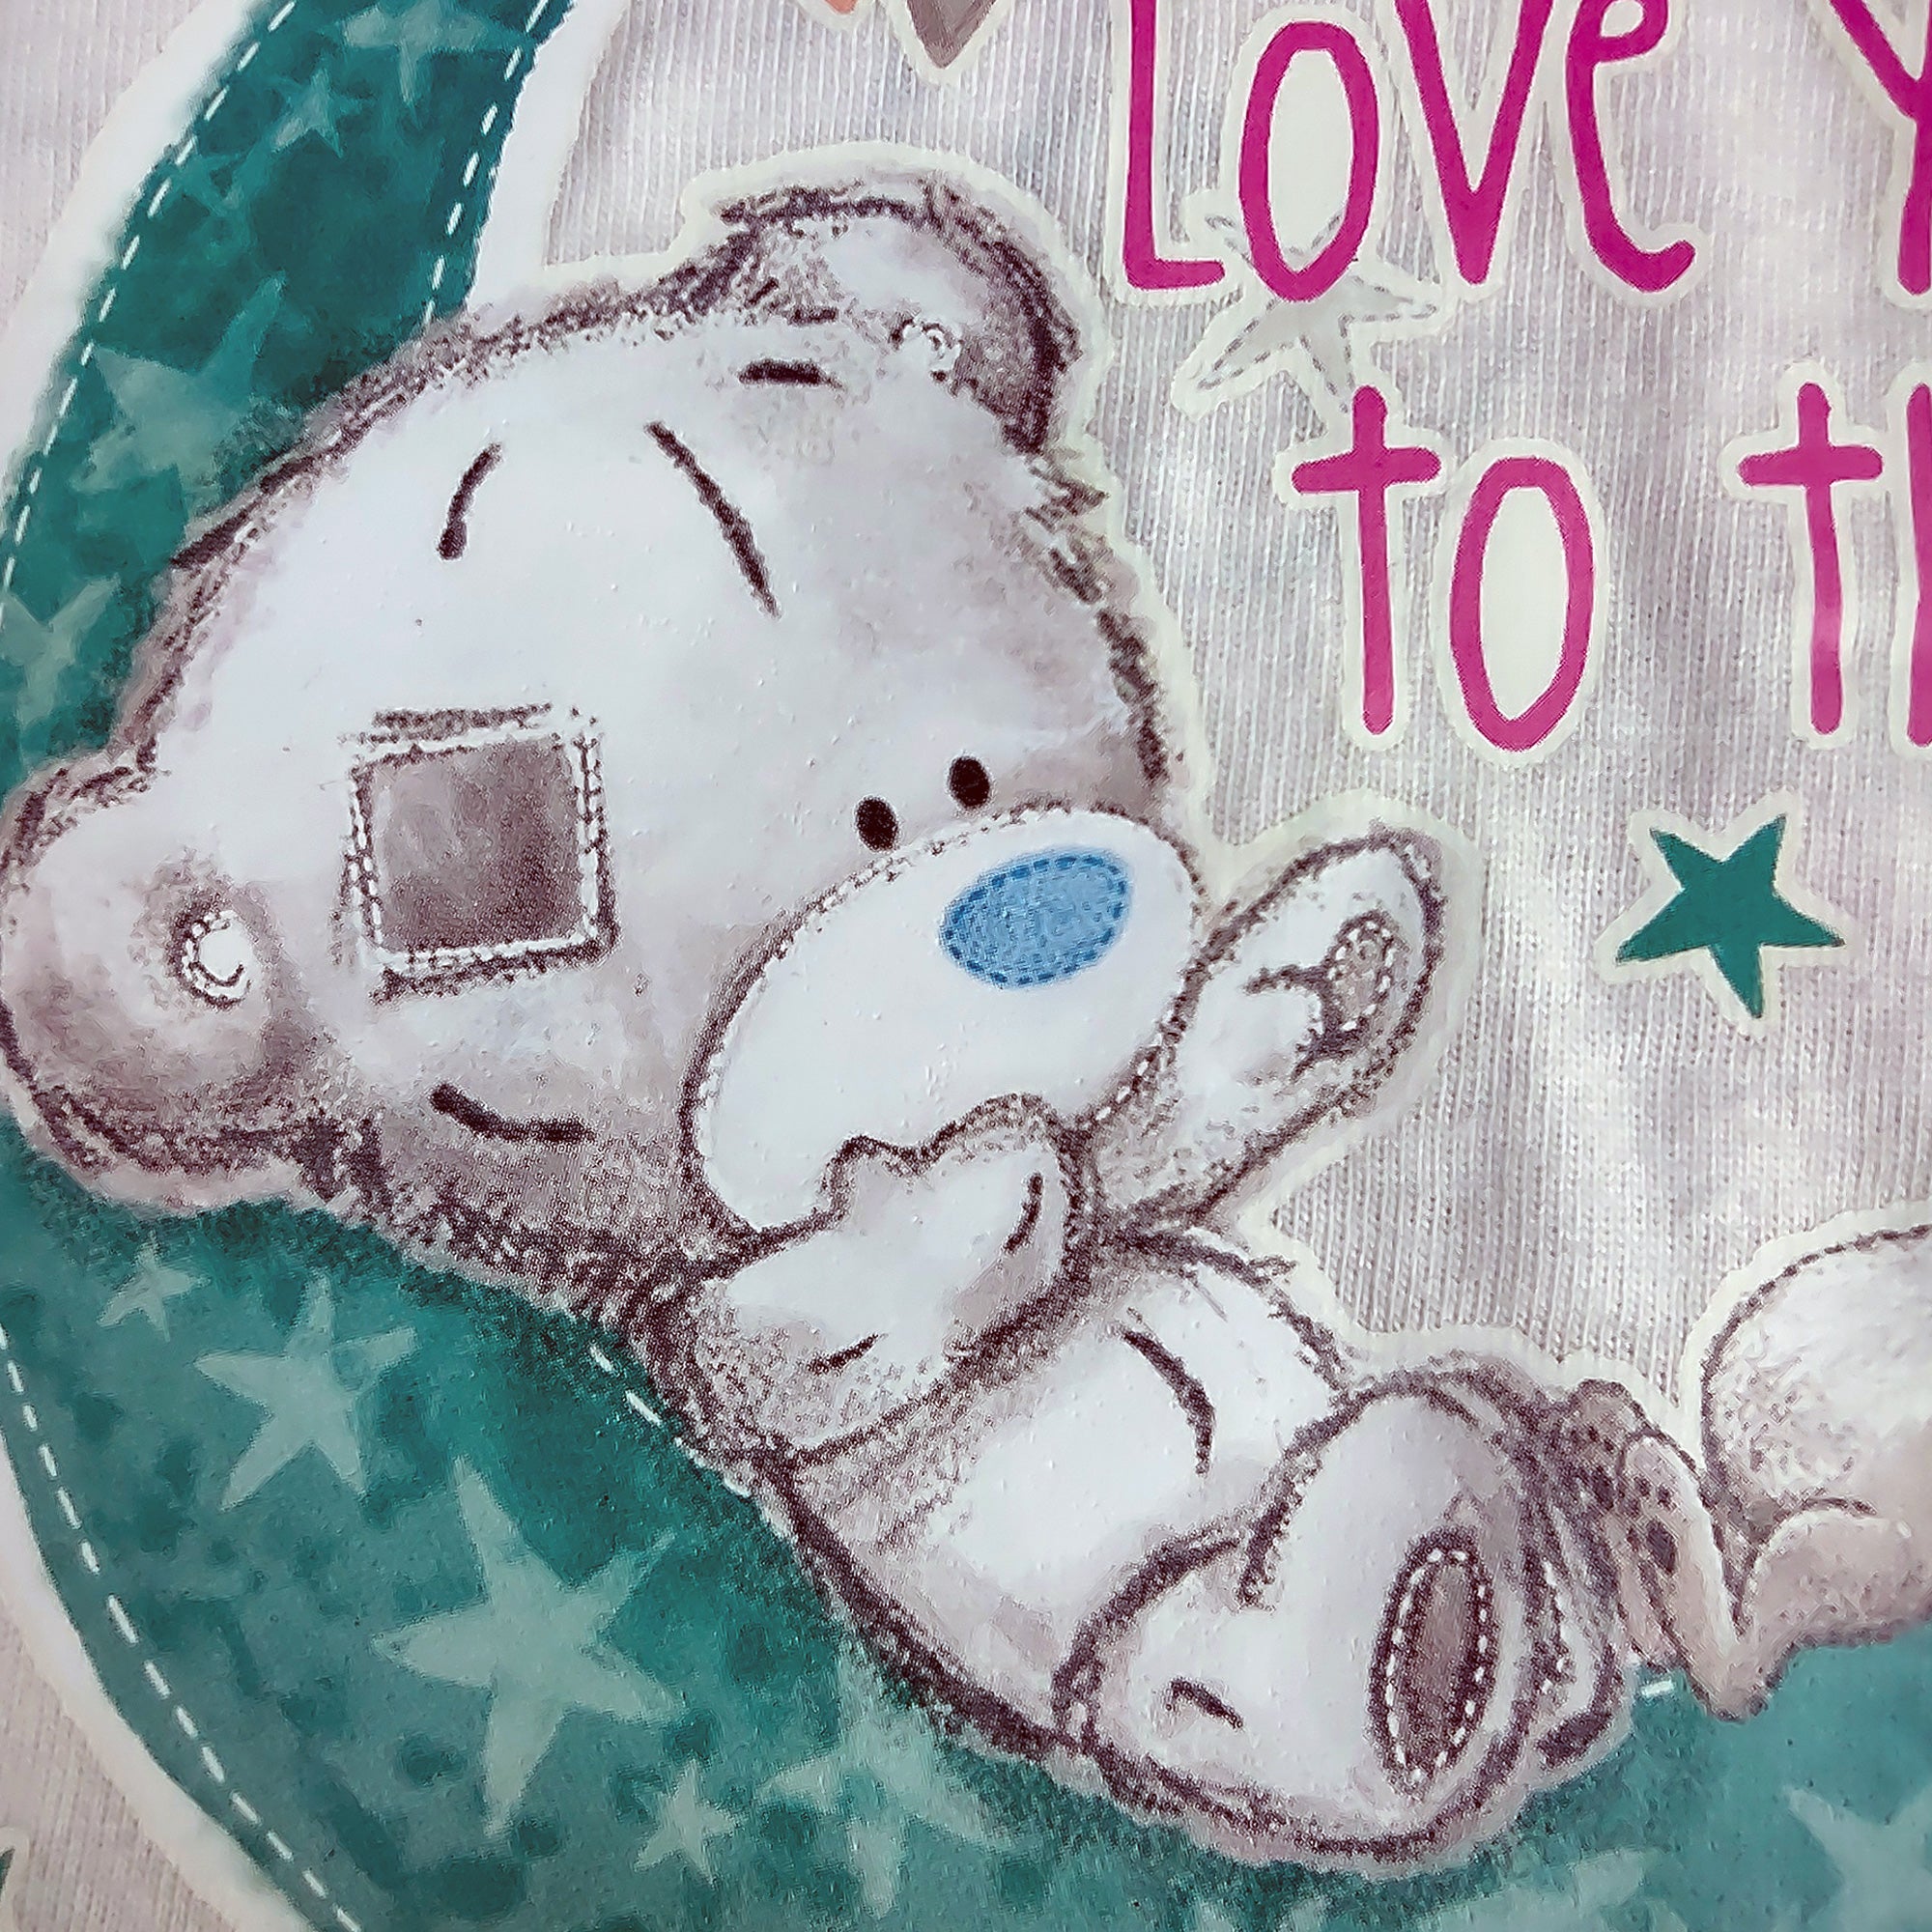 Tatty Teddy Baby Pyjamas - Love You To The Moon - 2 Piece Set- Sizes 6-24 Months top detail